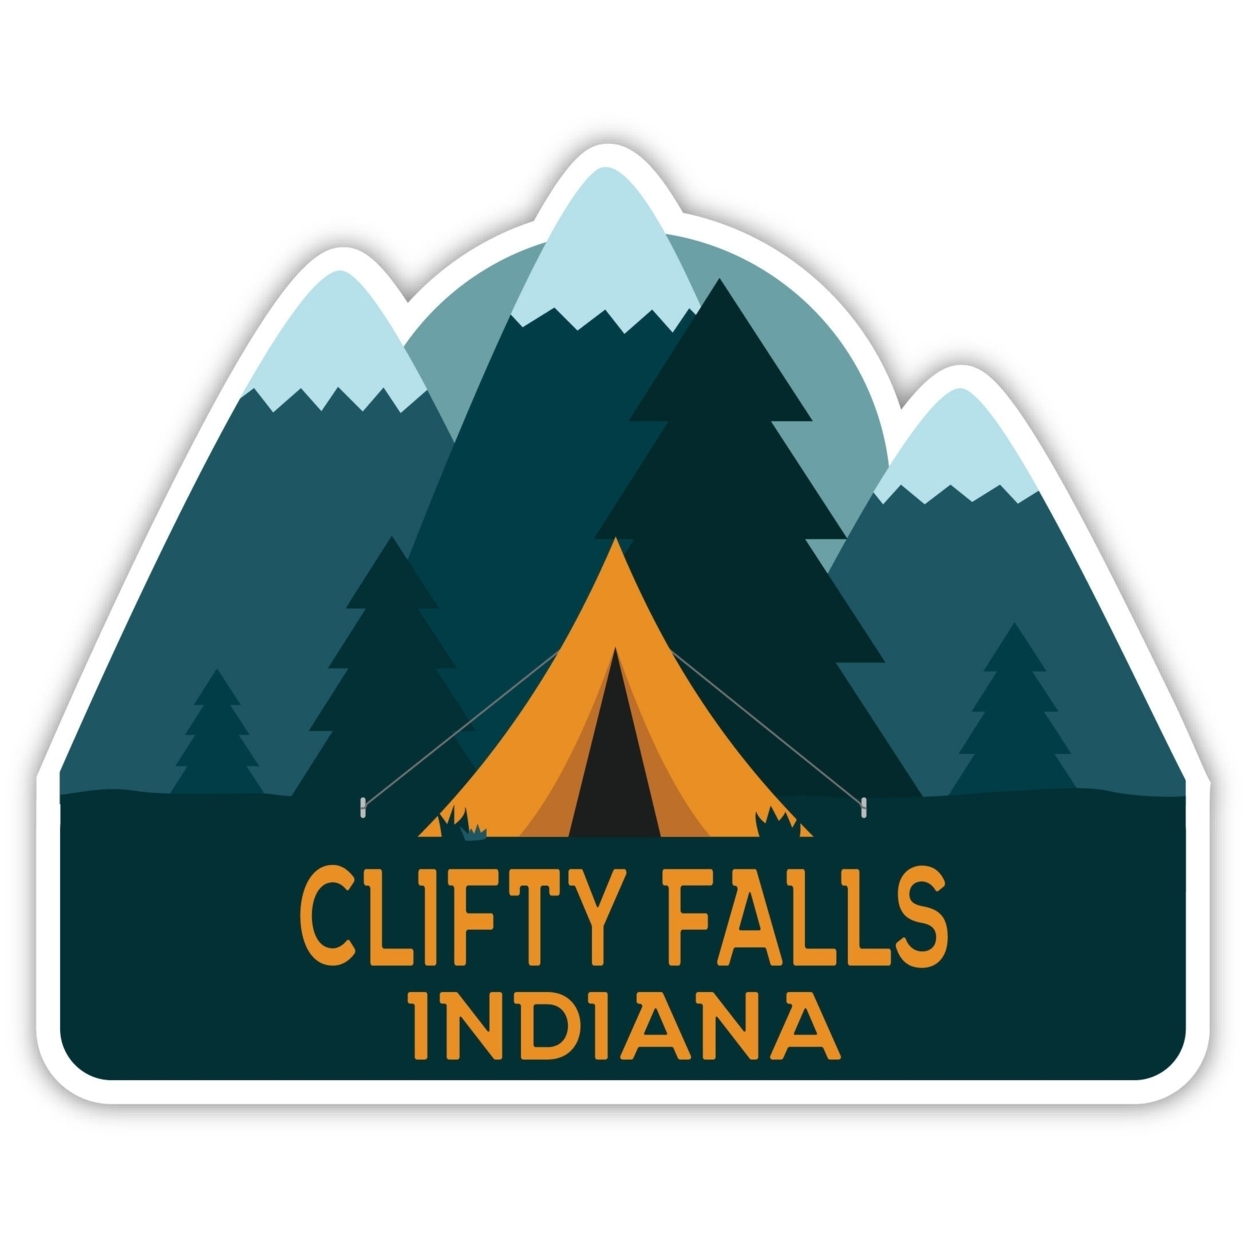 Clifty Falls Indiana Souvenir Decorative Stickers (Choose Theme And Size) - Single Unit, 12-Inch, Tent